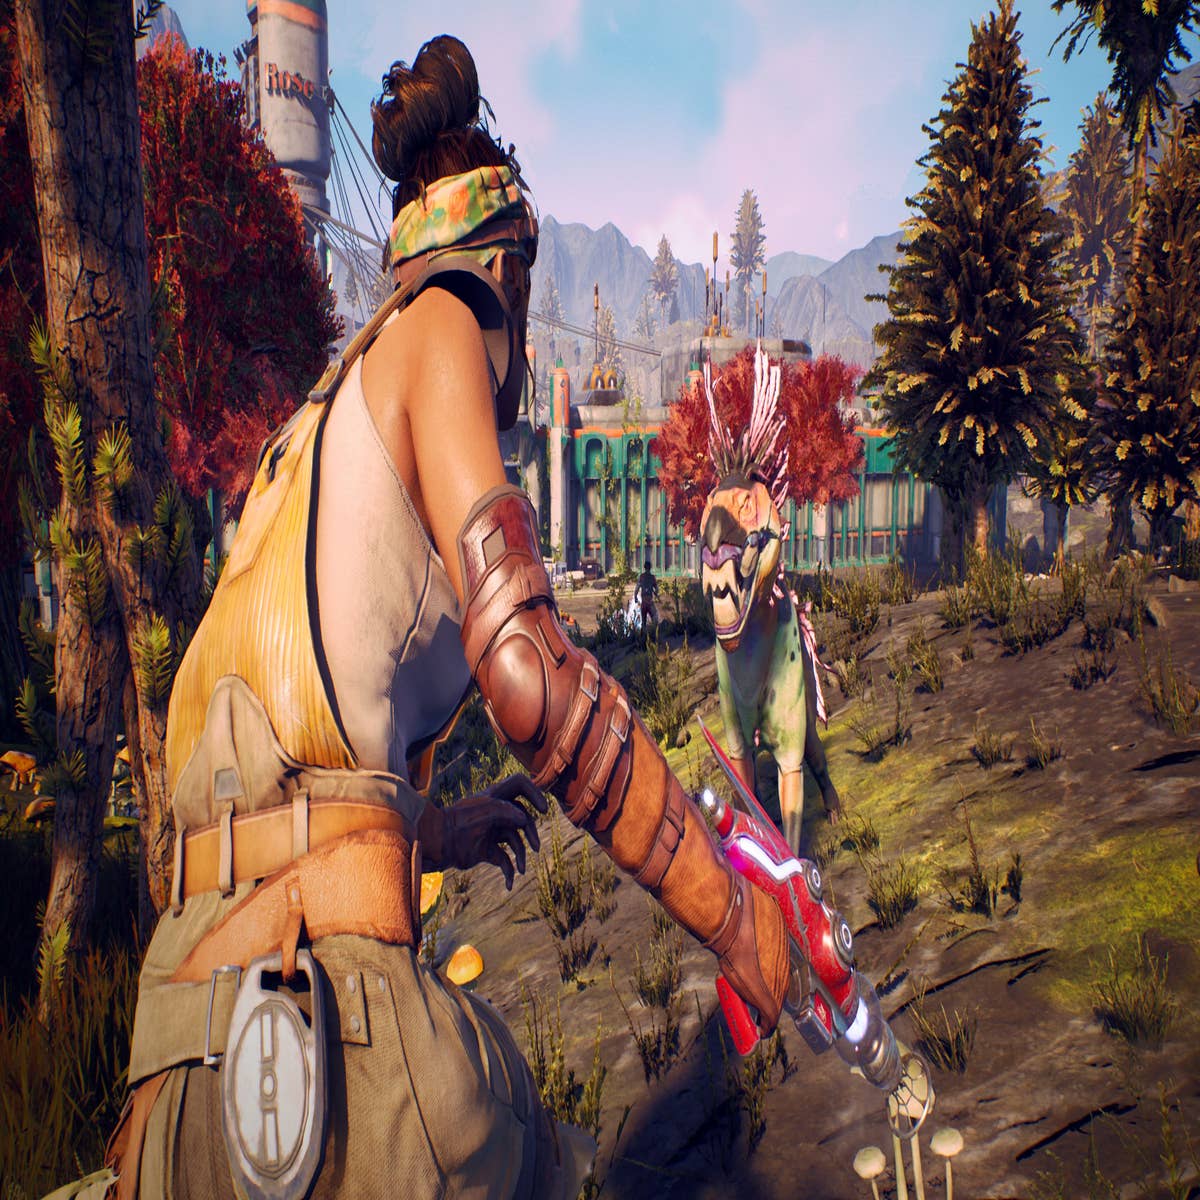 The Outer Worlds (Steam)